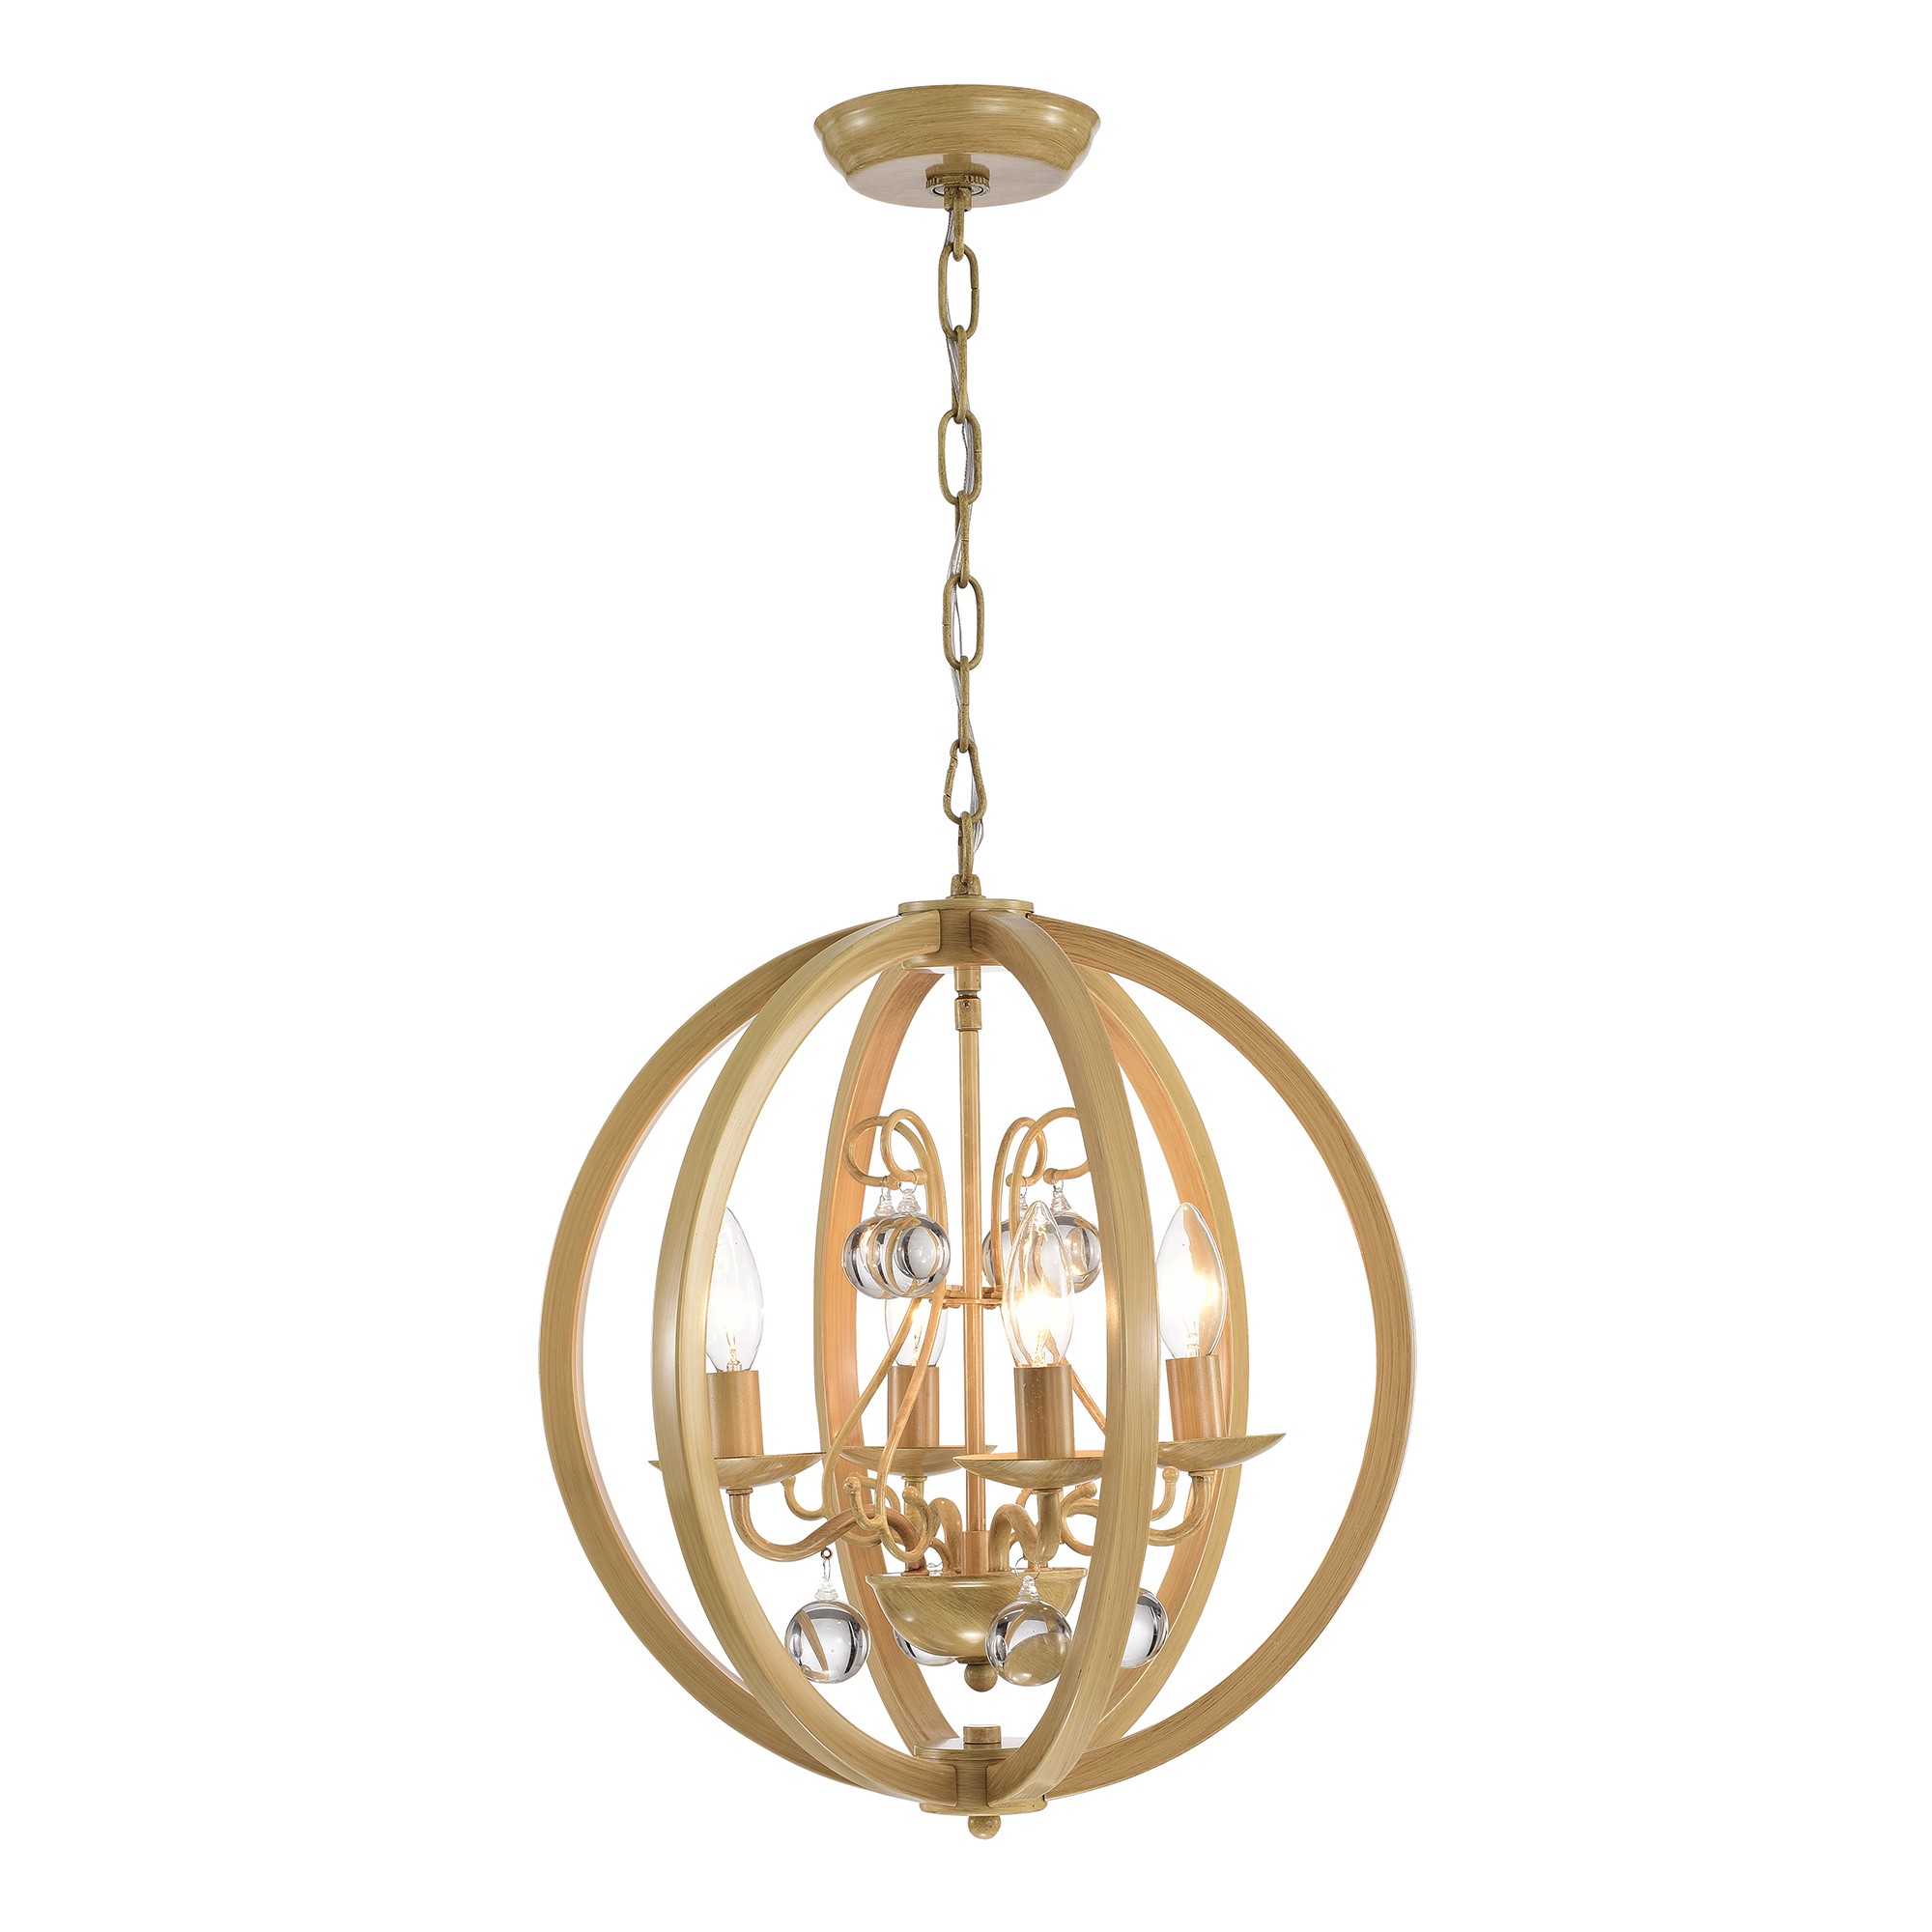 Elka 4-light Wood Painted Metal Pendant Lamp with Removable Crystals